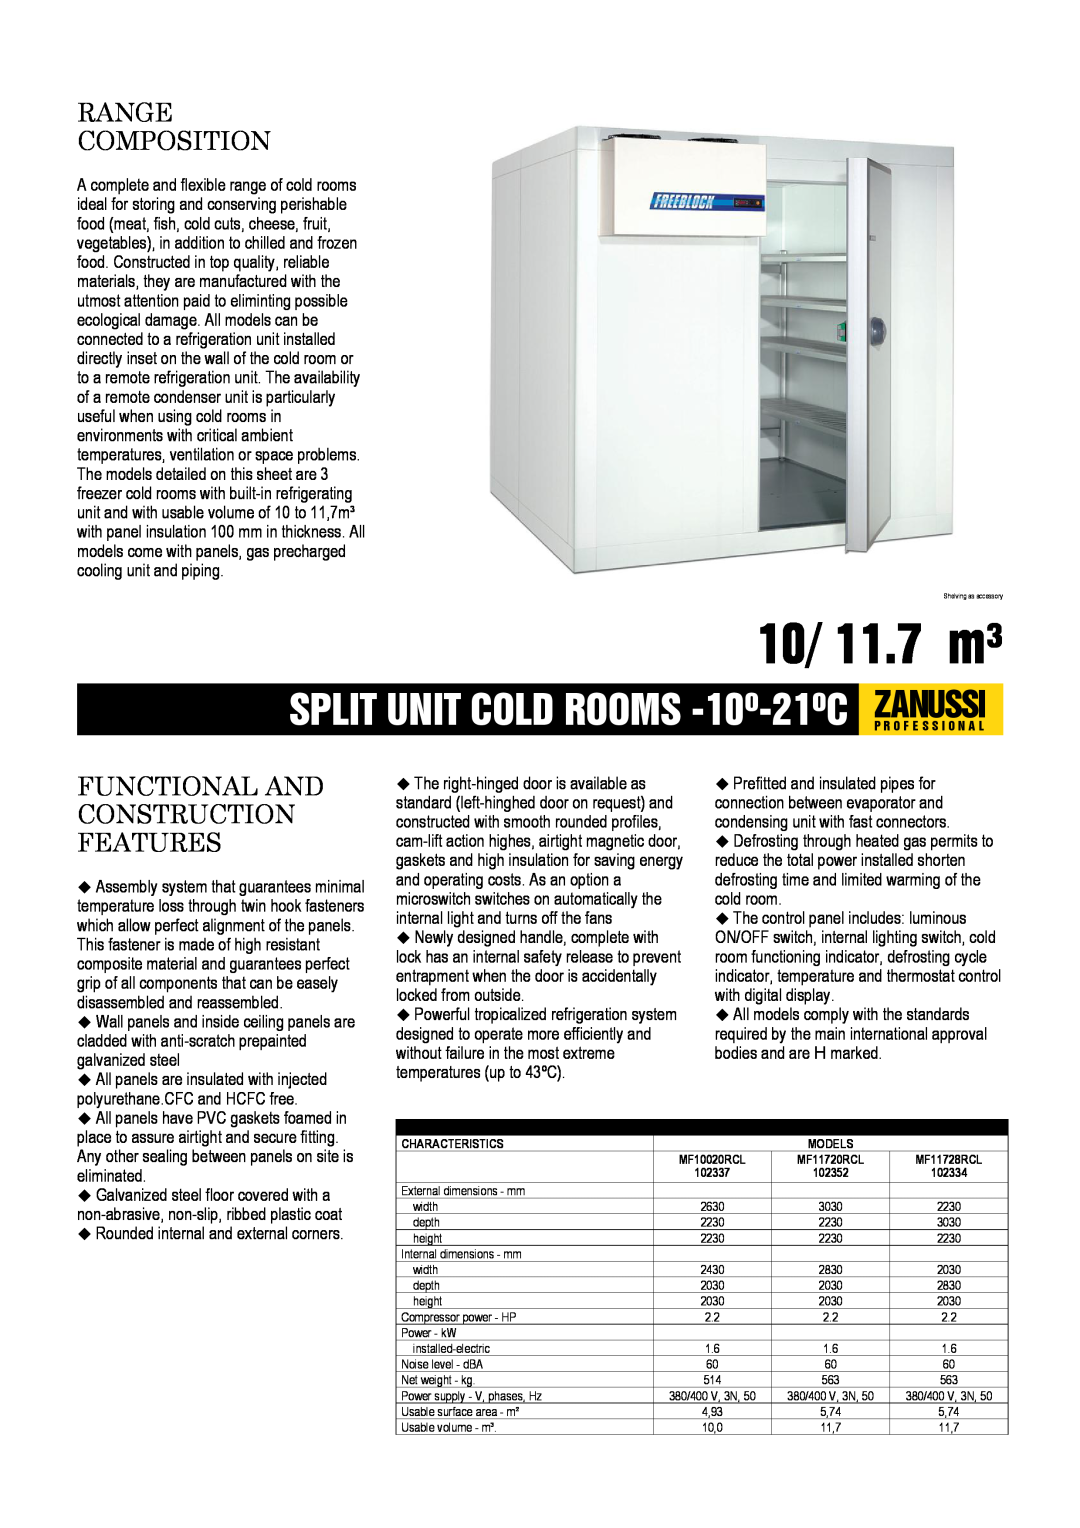 Zanussi MF11720RCL, MF11728RCL, MF10020RCL dimensions 10/ 11.7 m³, Range Composition, Functional And Construction Features 